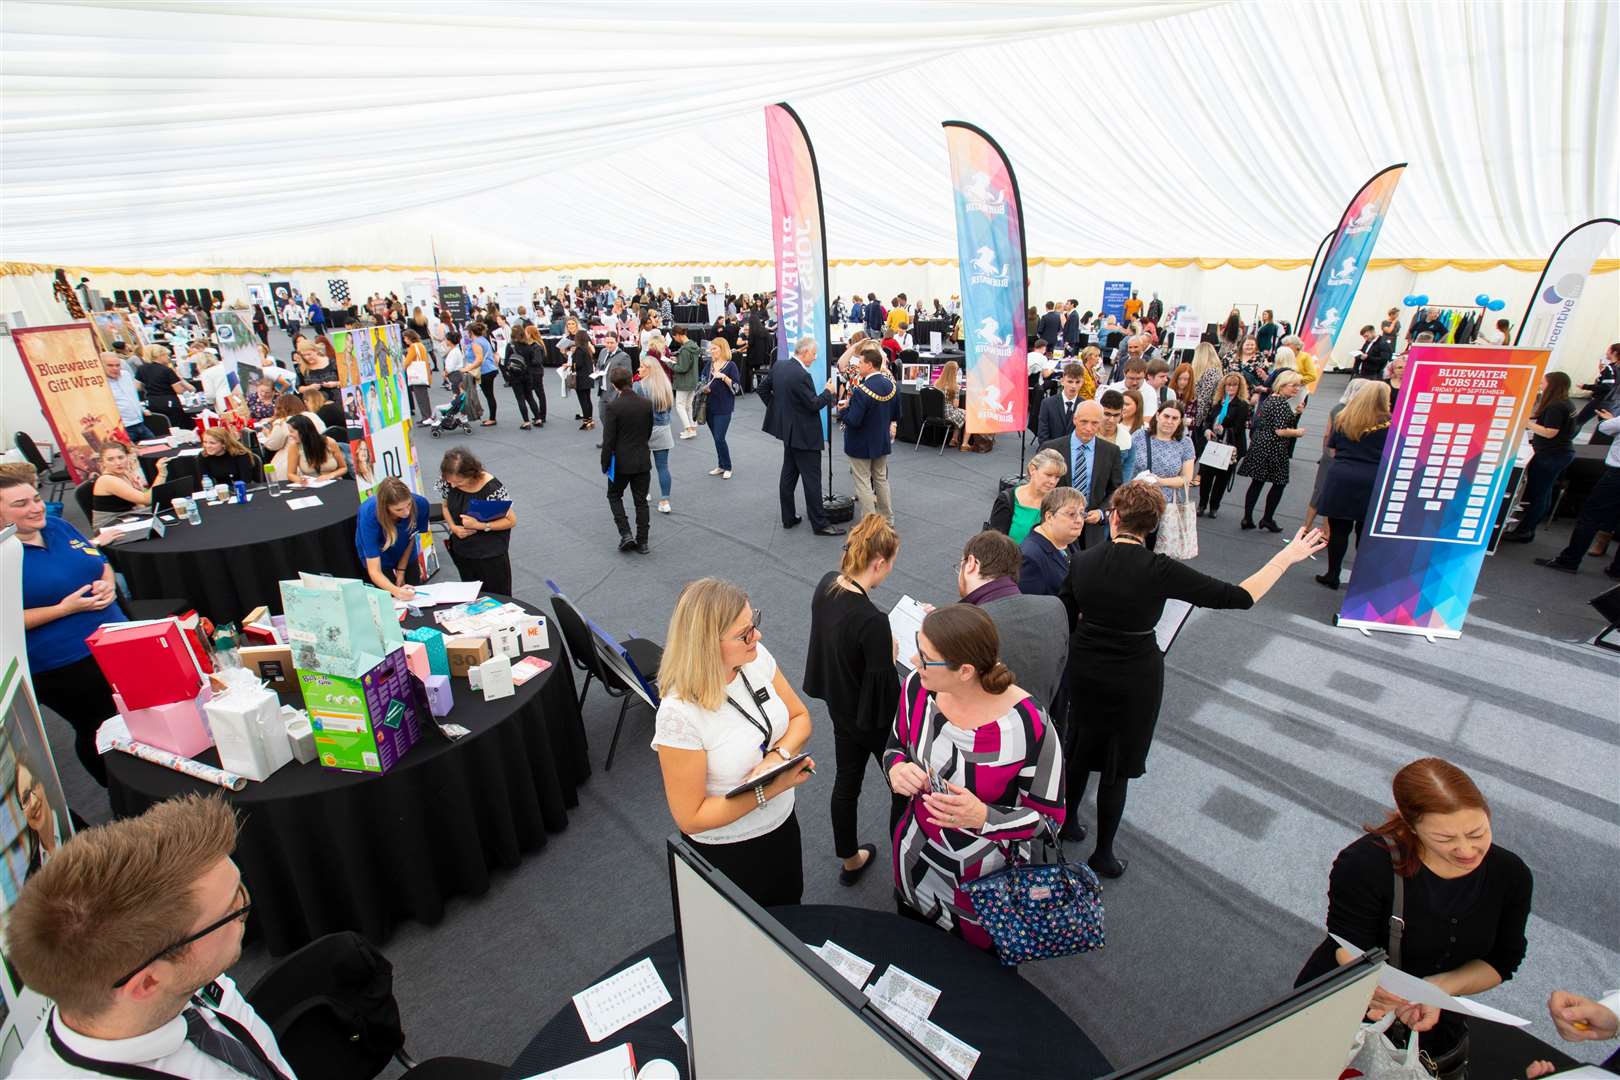 The jobs fair regularly attracts big crowds